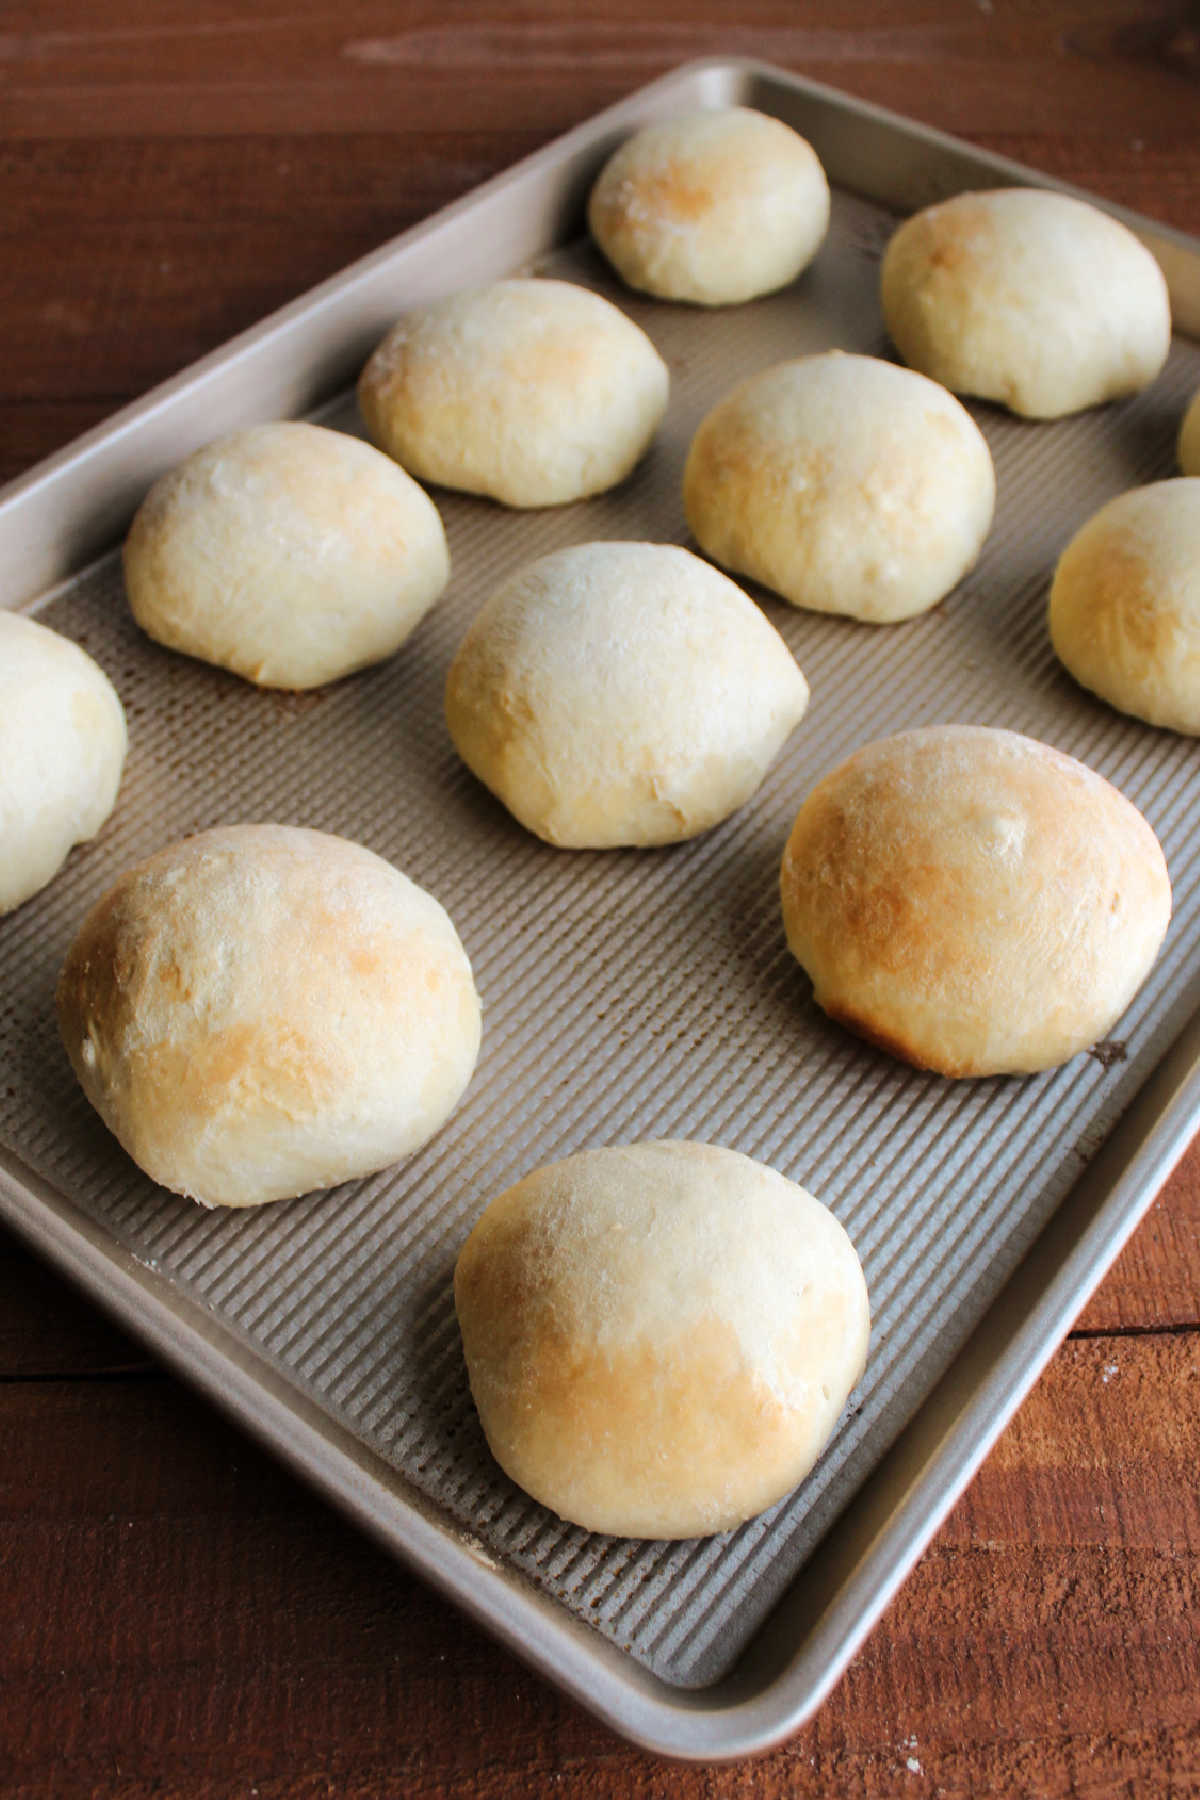 Freshly baked yeast rolls with light golden brown tops on sheet pan.